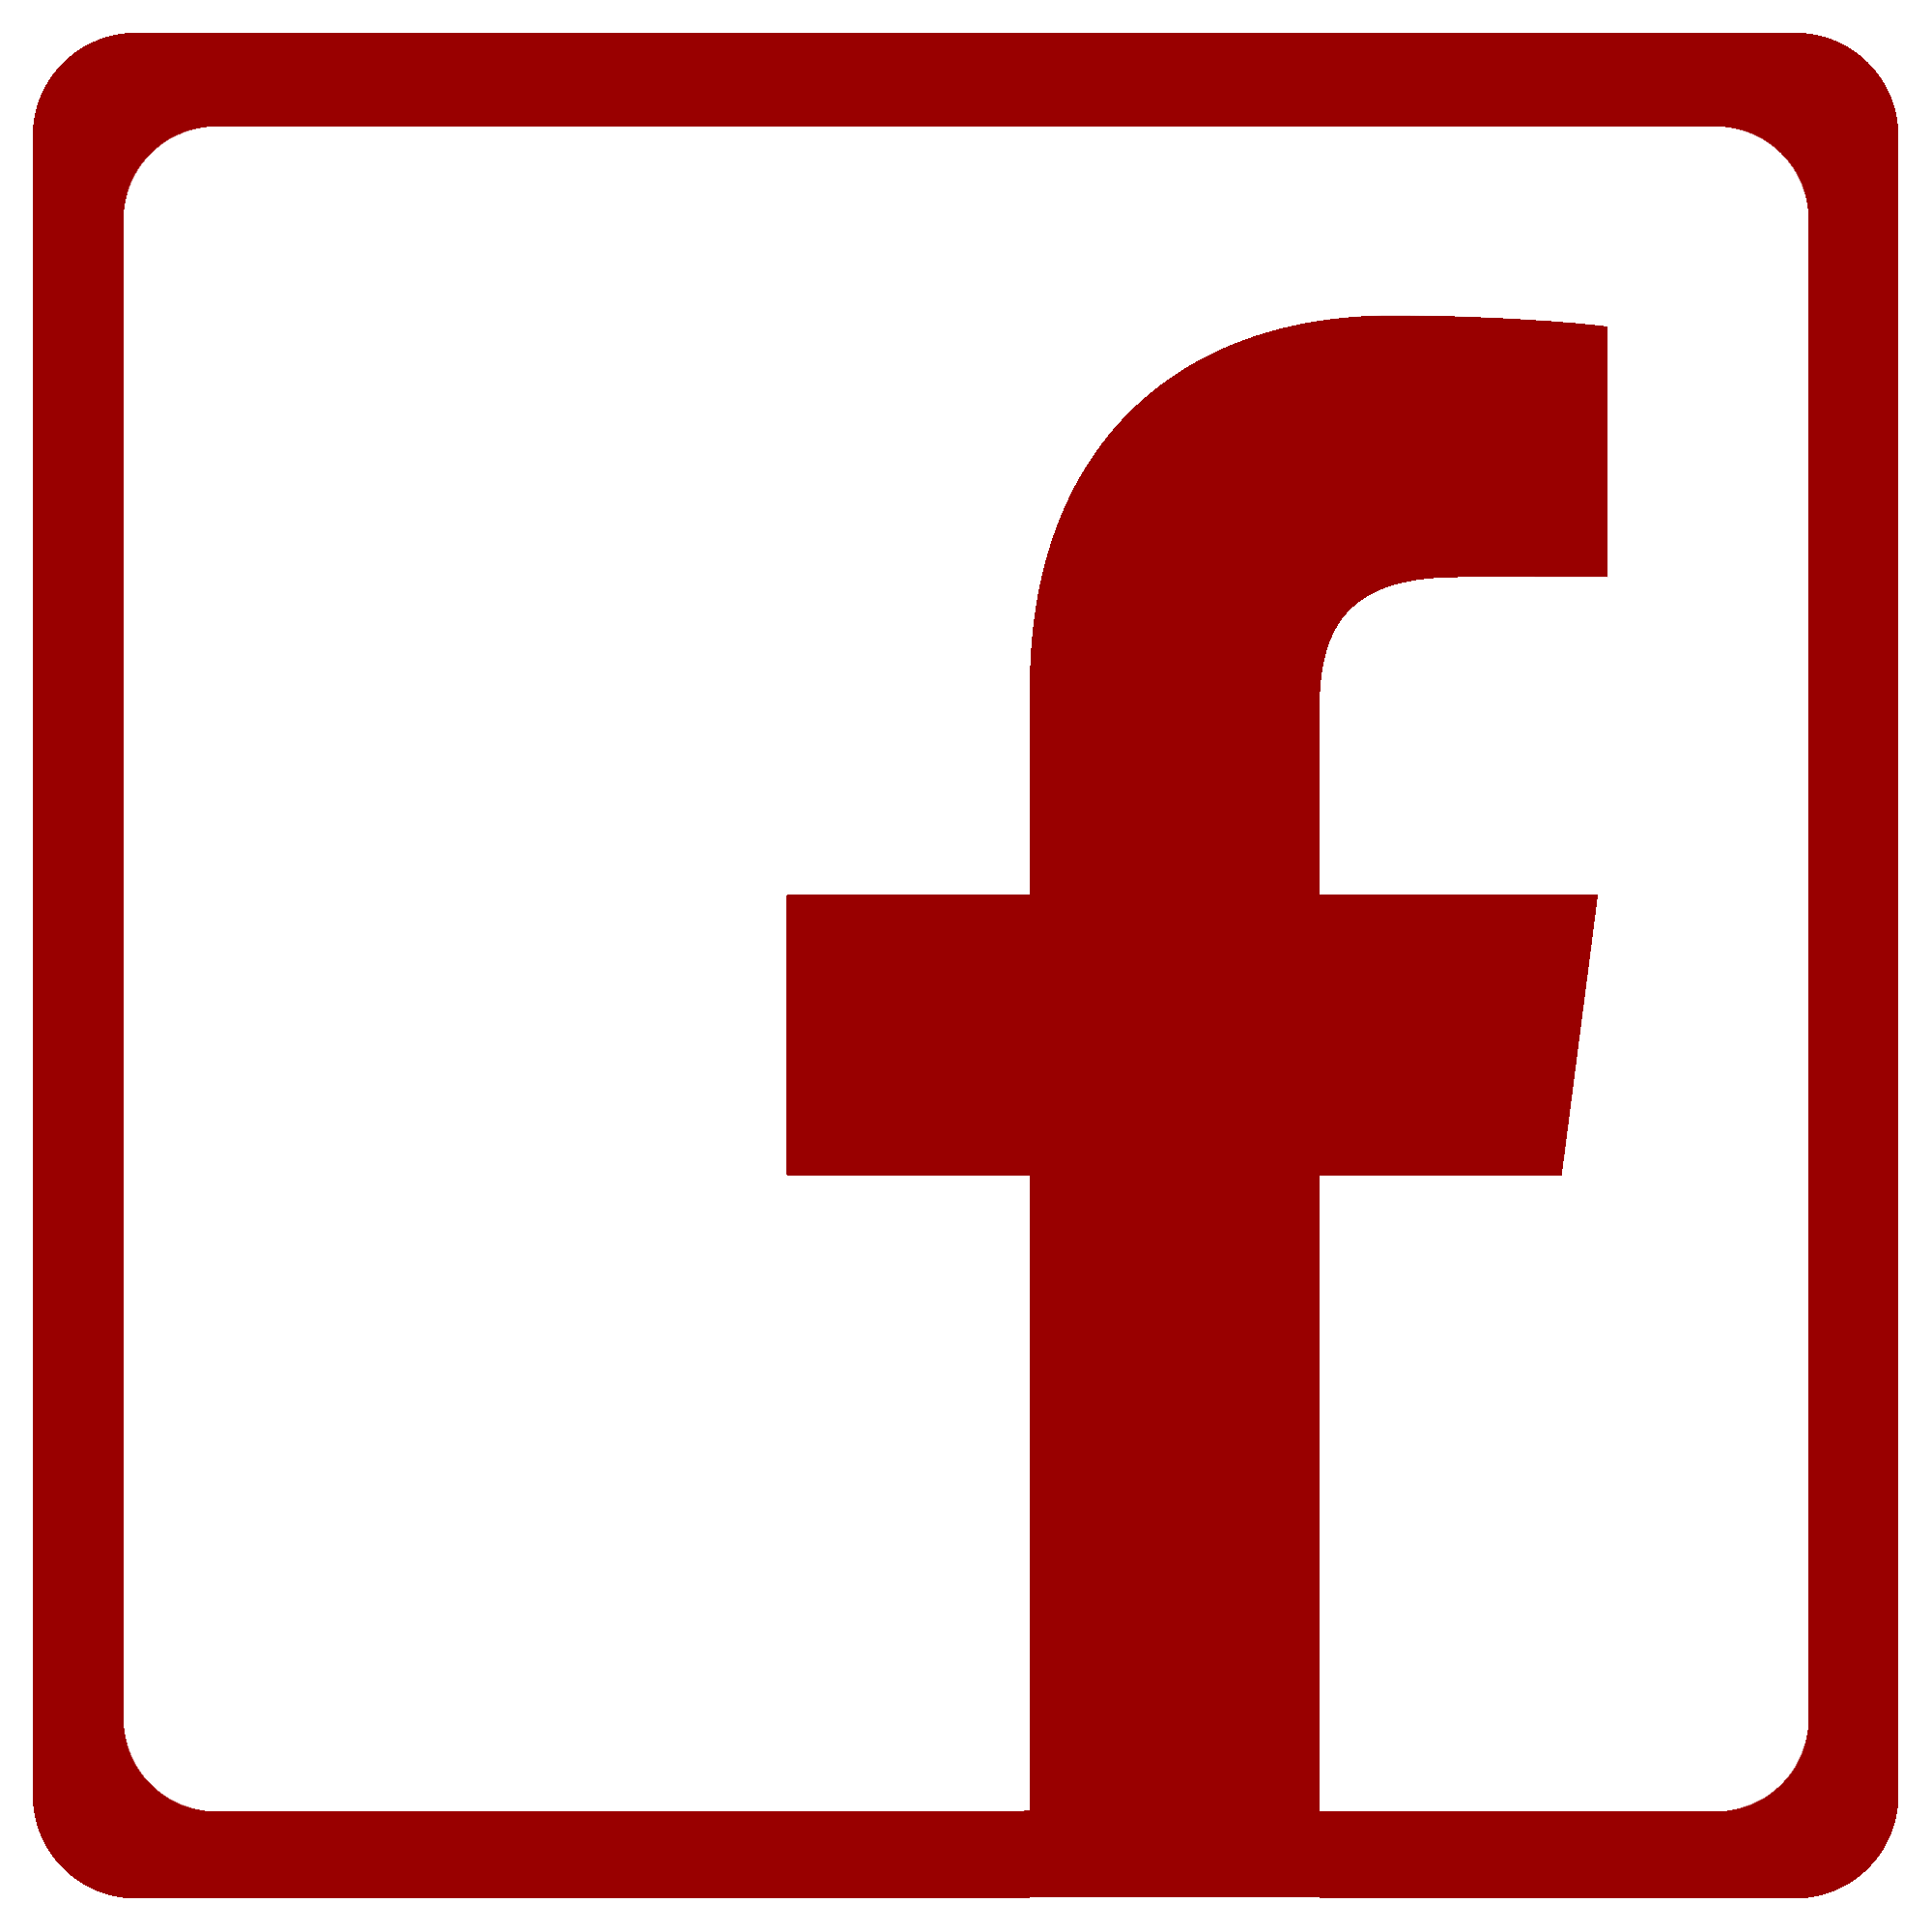 Red Facebook Logo - File:Facebook-logo-white.png - Wikimedia Commons